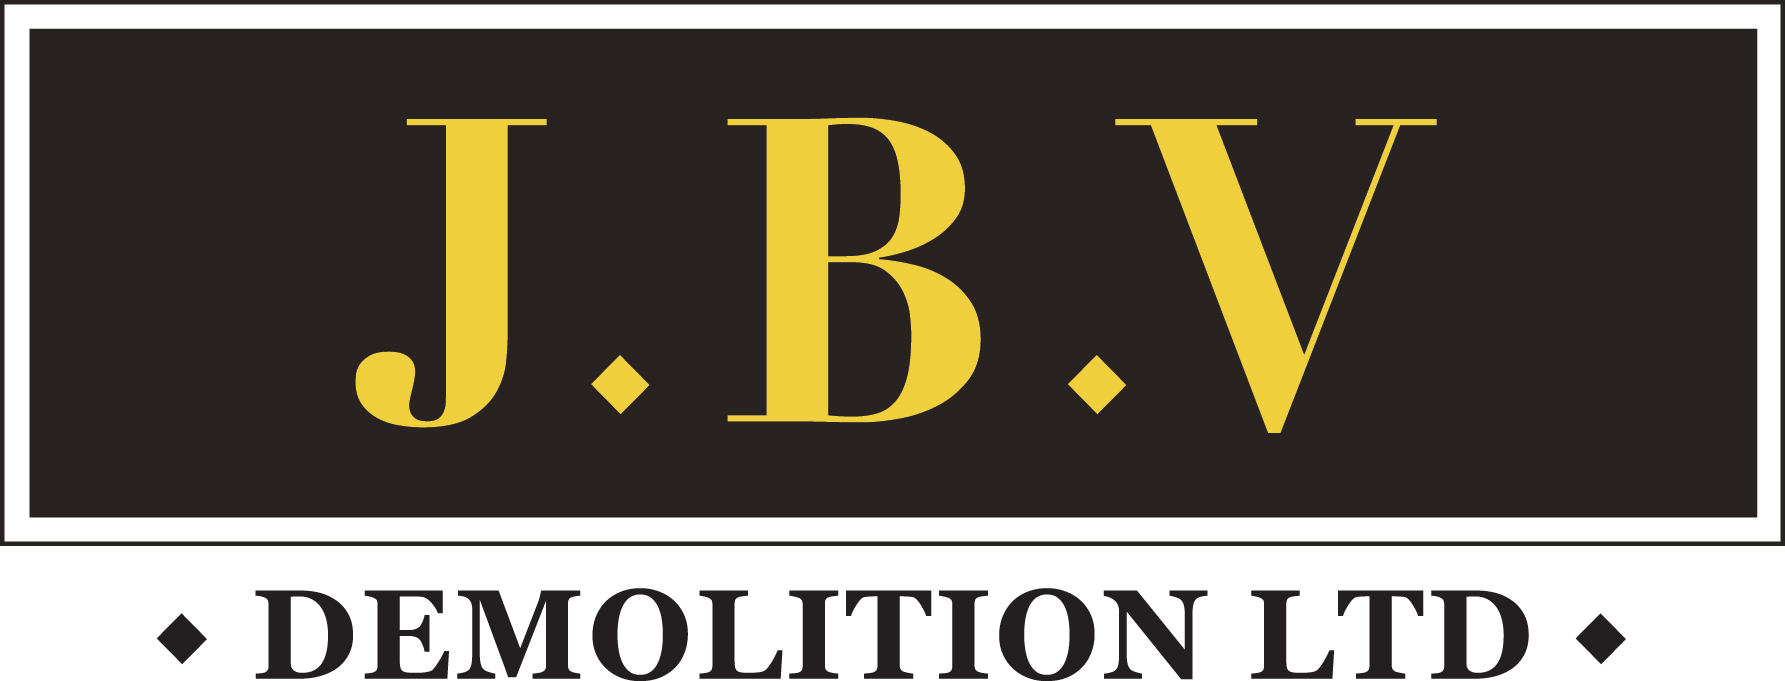 PLANT OPERATOR DAILY & WEEKLY INSPECTIONS - Doc No - JBV/DWPC:1